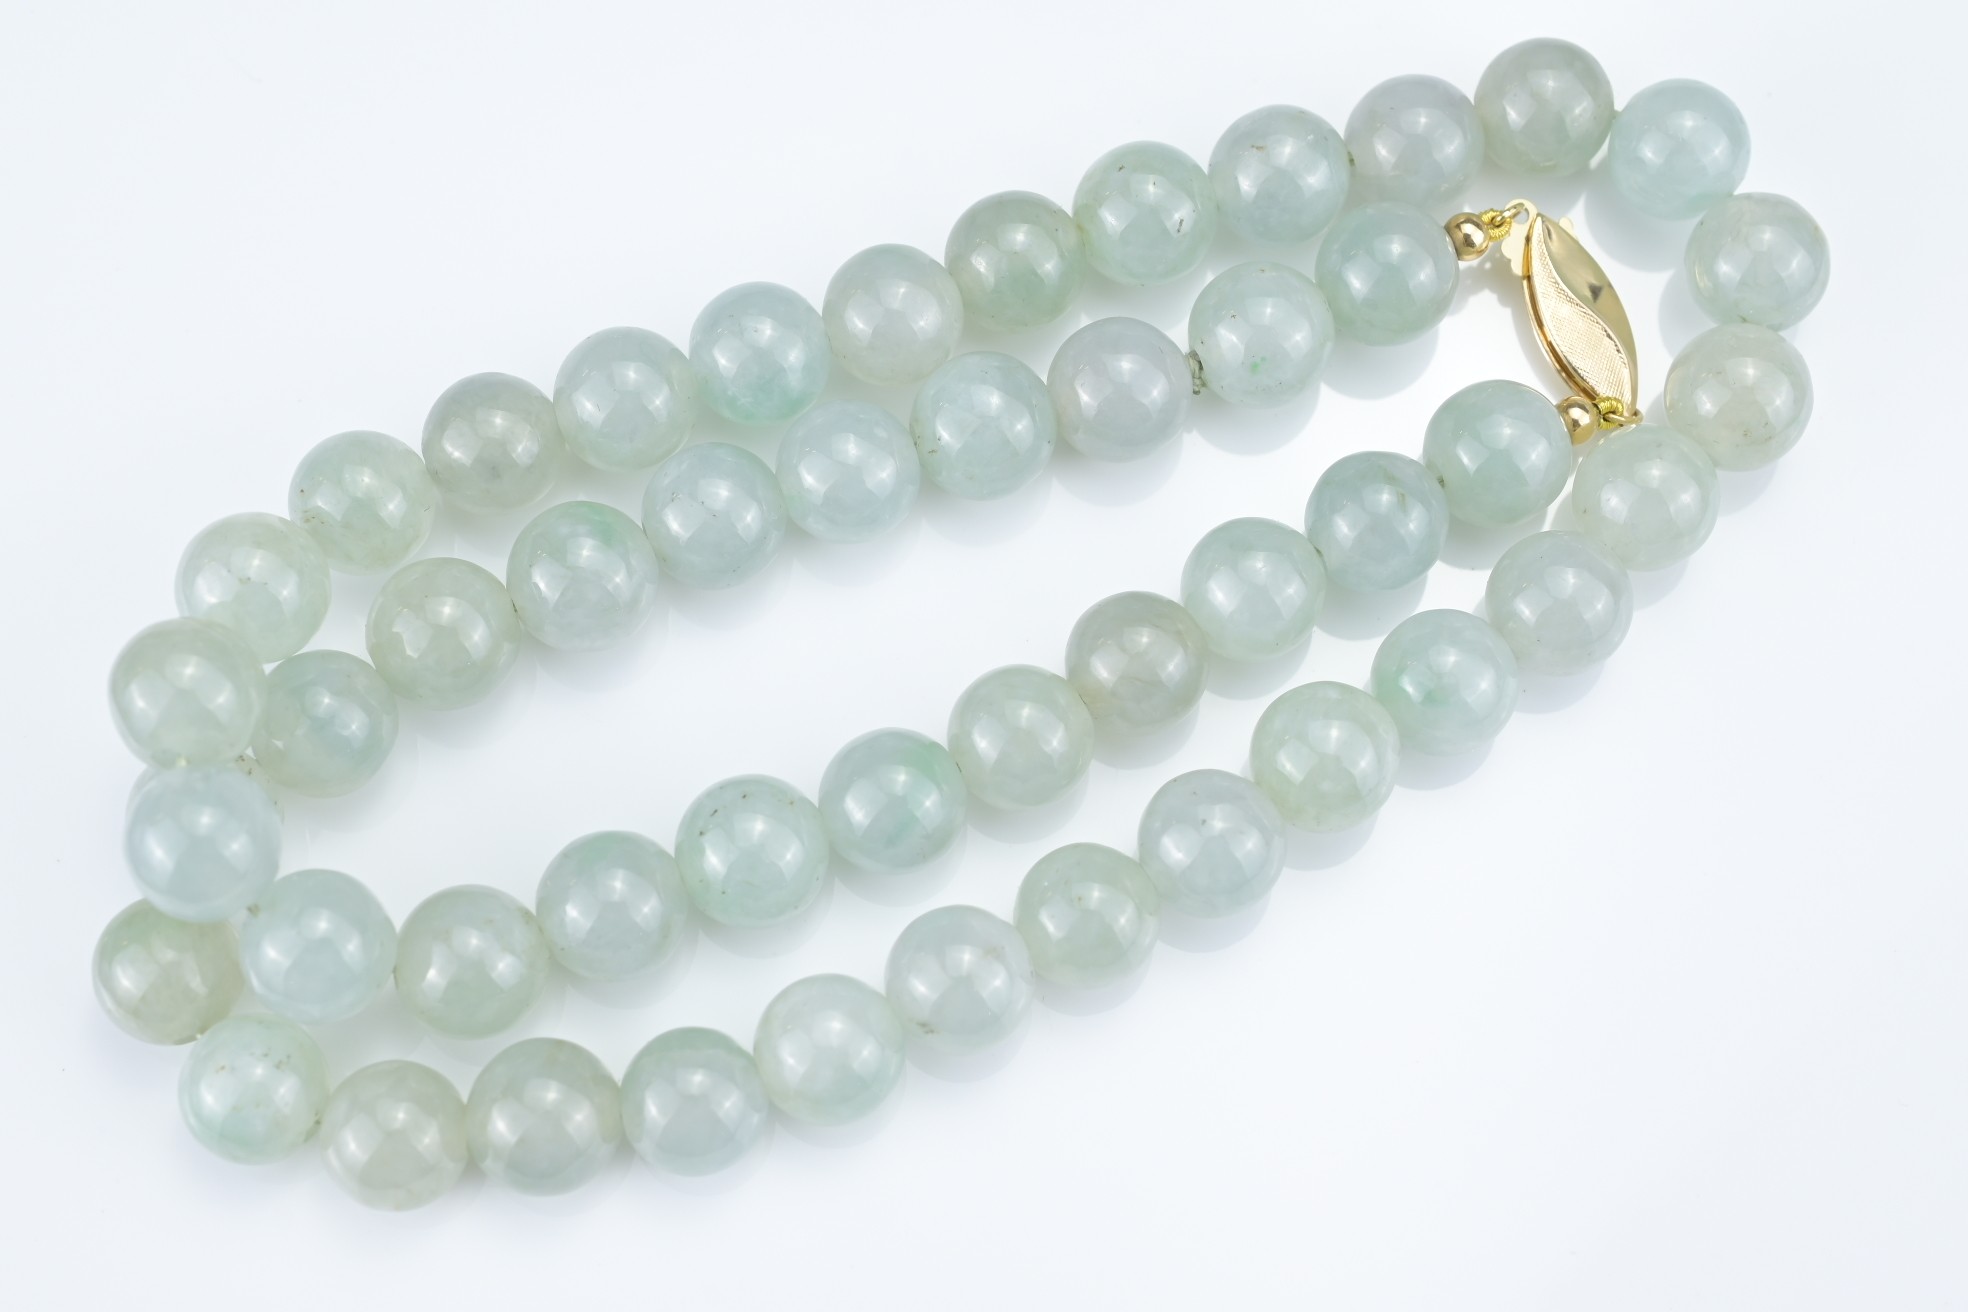 A PALE GREEN JADEITE SINGLE STRAND BEADED NECKLACE WITH 18KT YELLOW GOLD CLASP. The marquise-